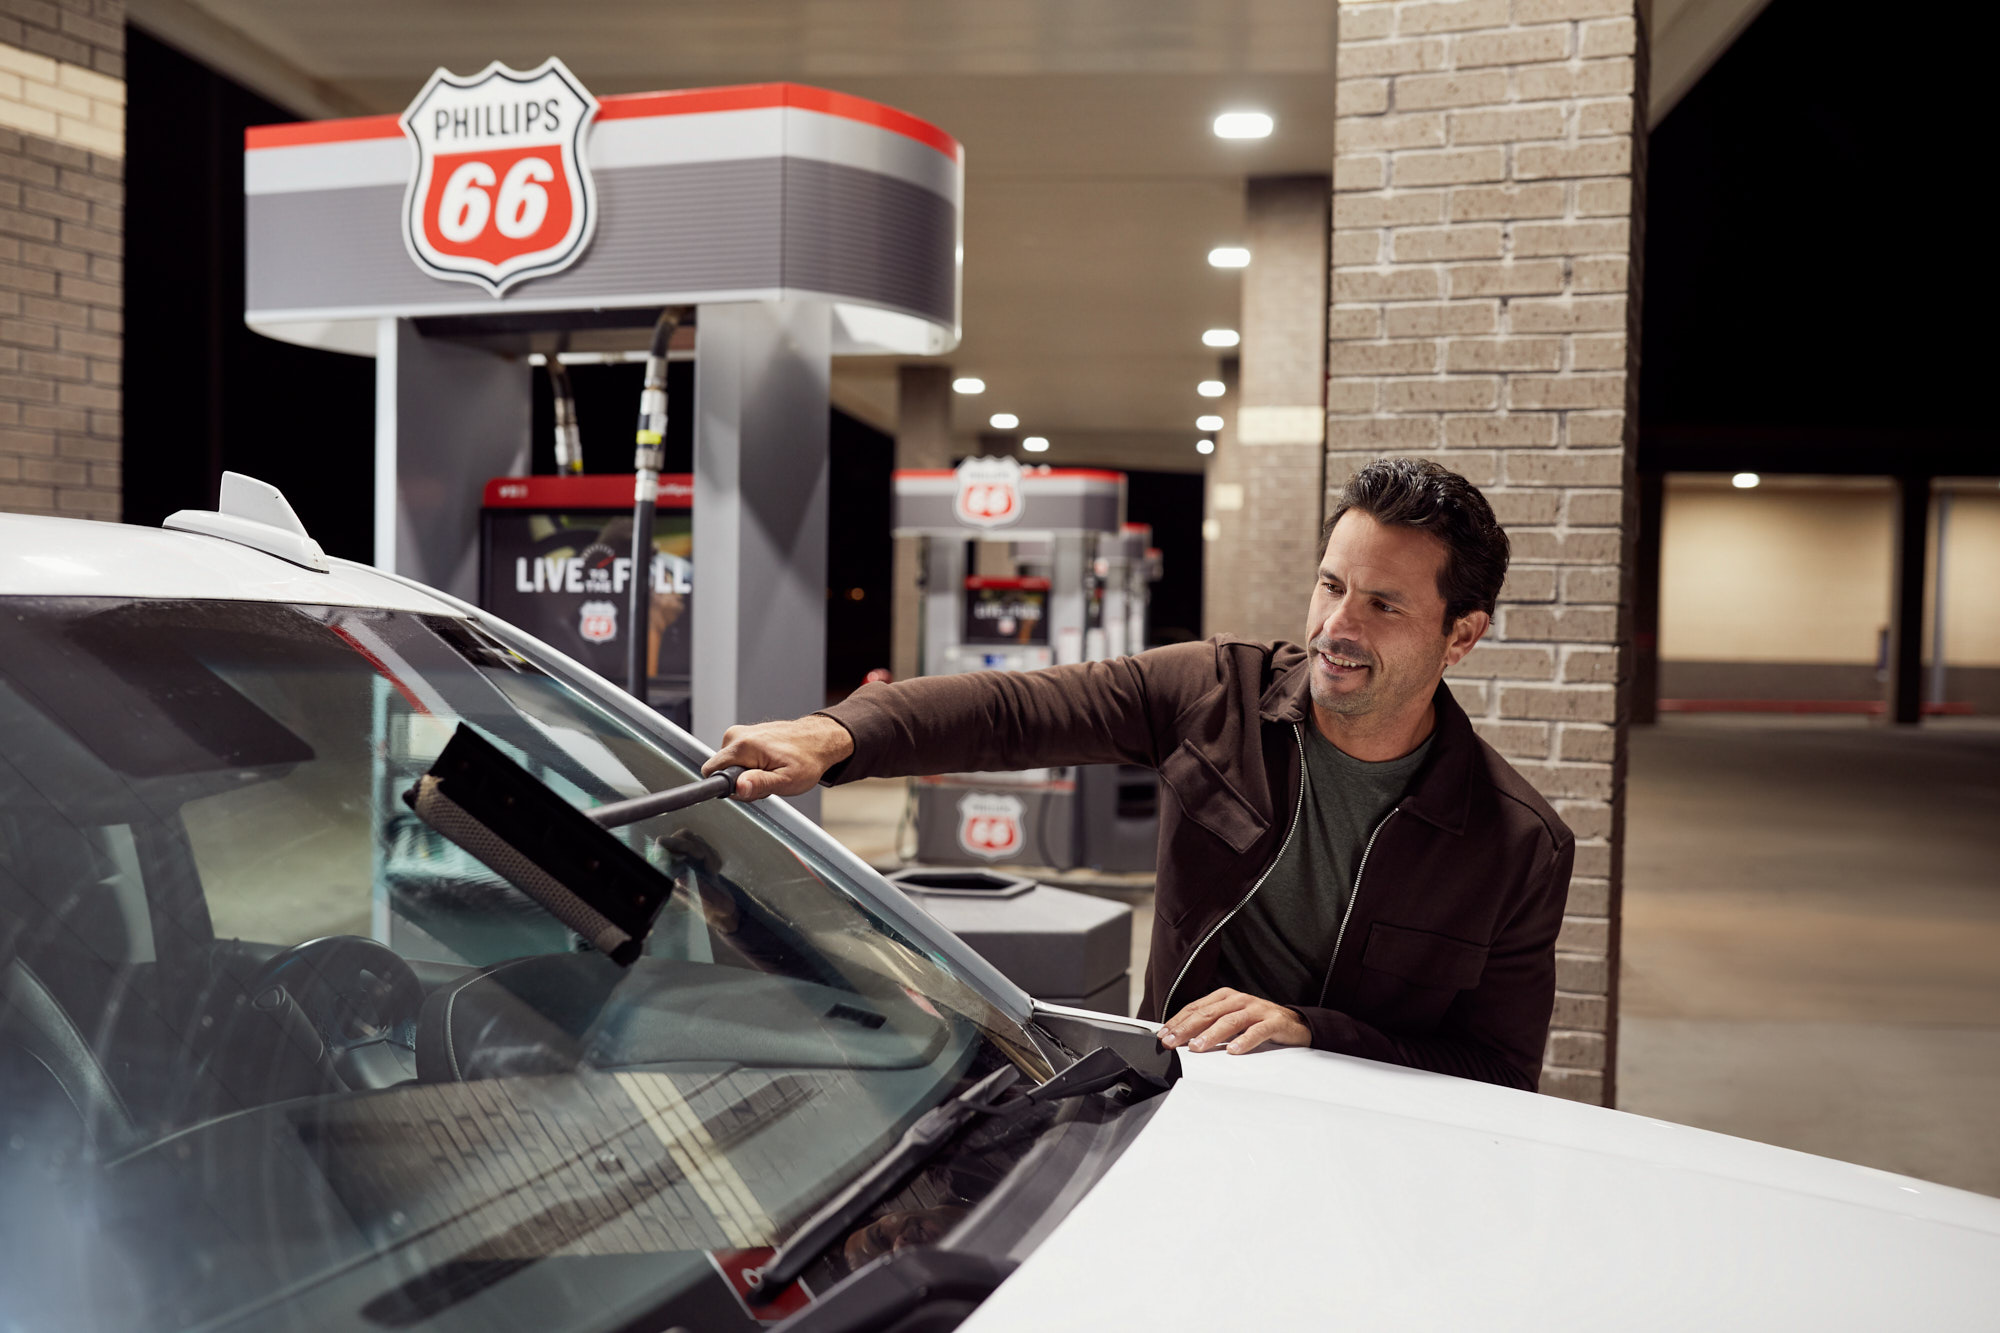 Man Cleaning Windshield at Clean Service Station | Brand Lifestyle Photography